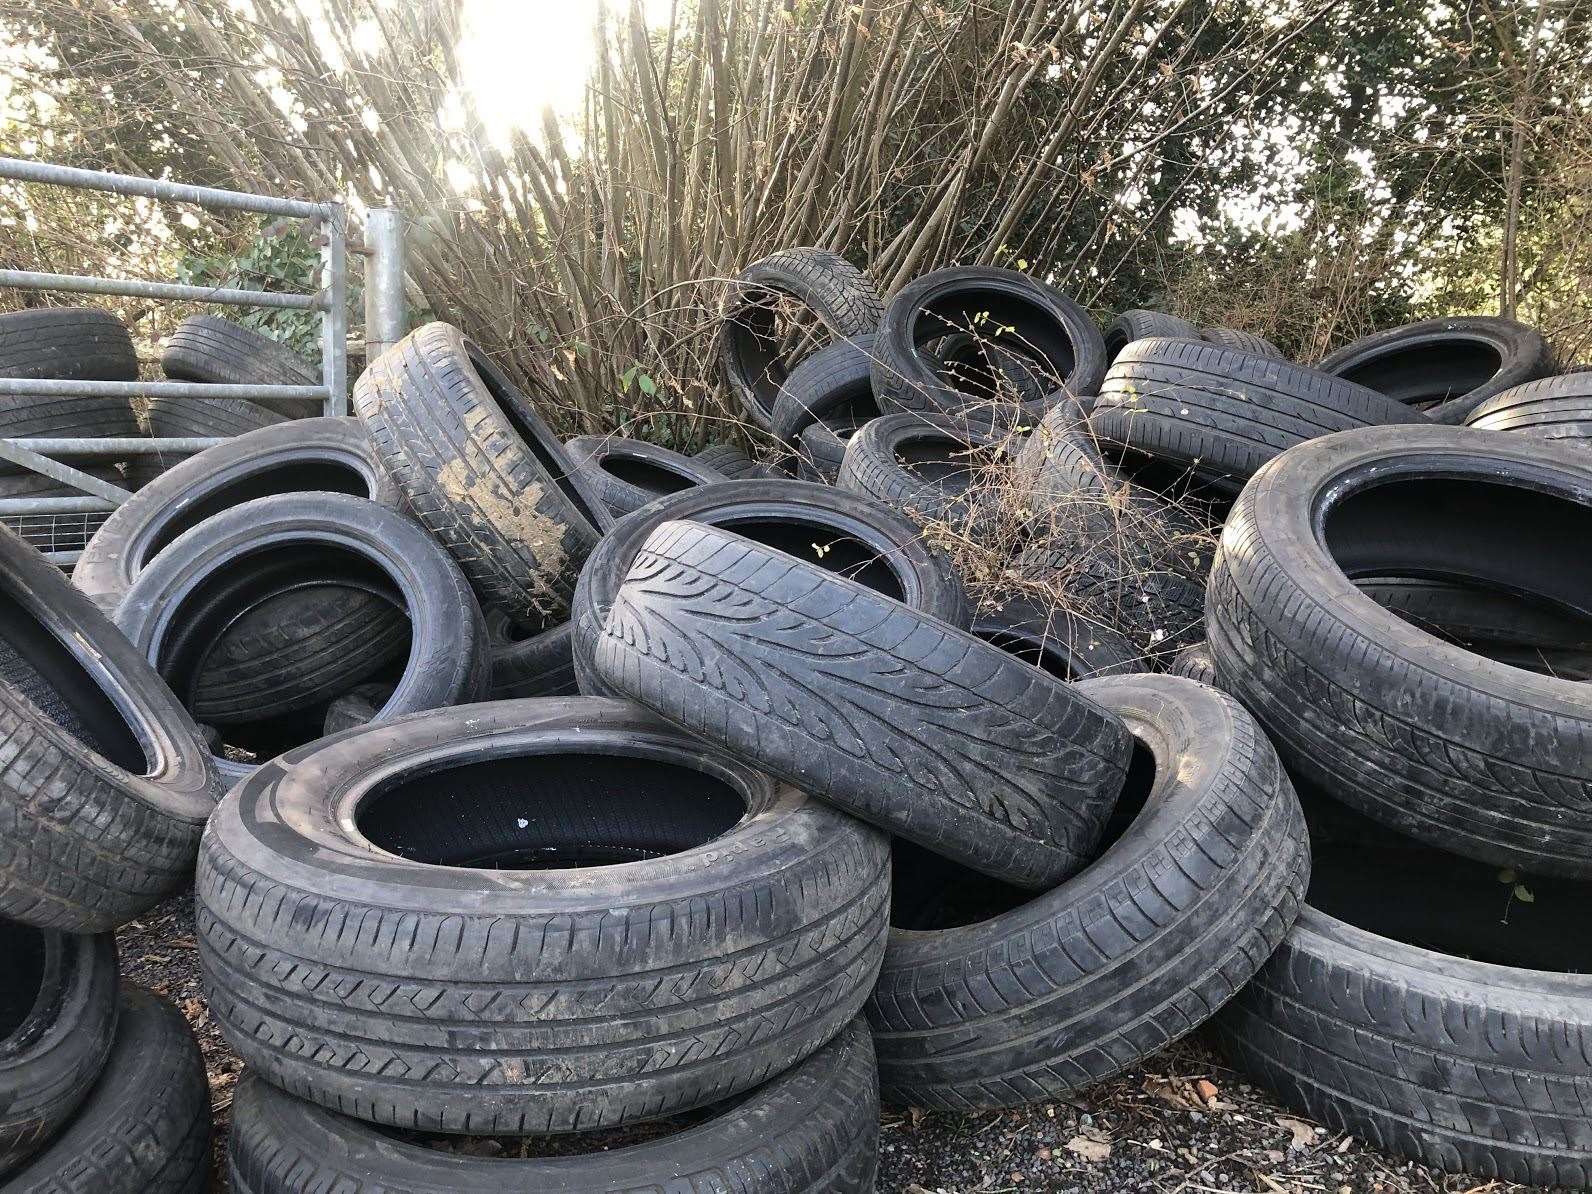 Mr Cunningham says about 80 tyres were dumped on the drive on Saturday night